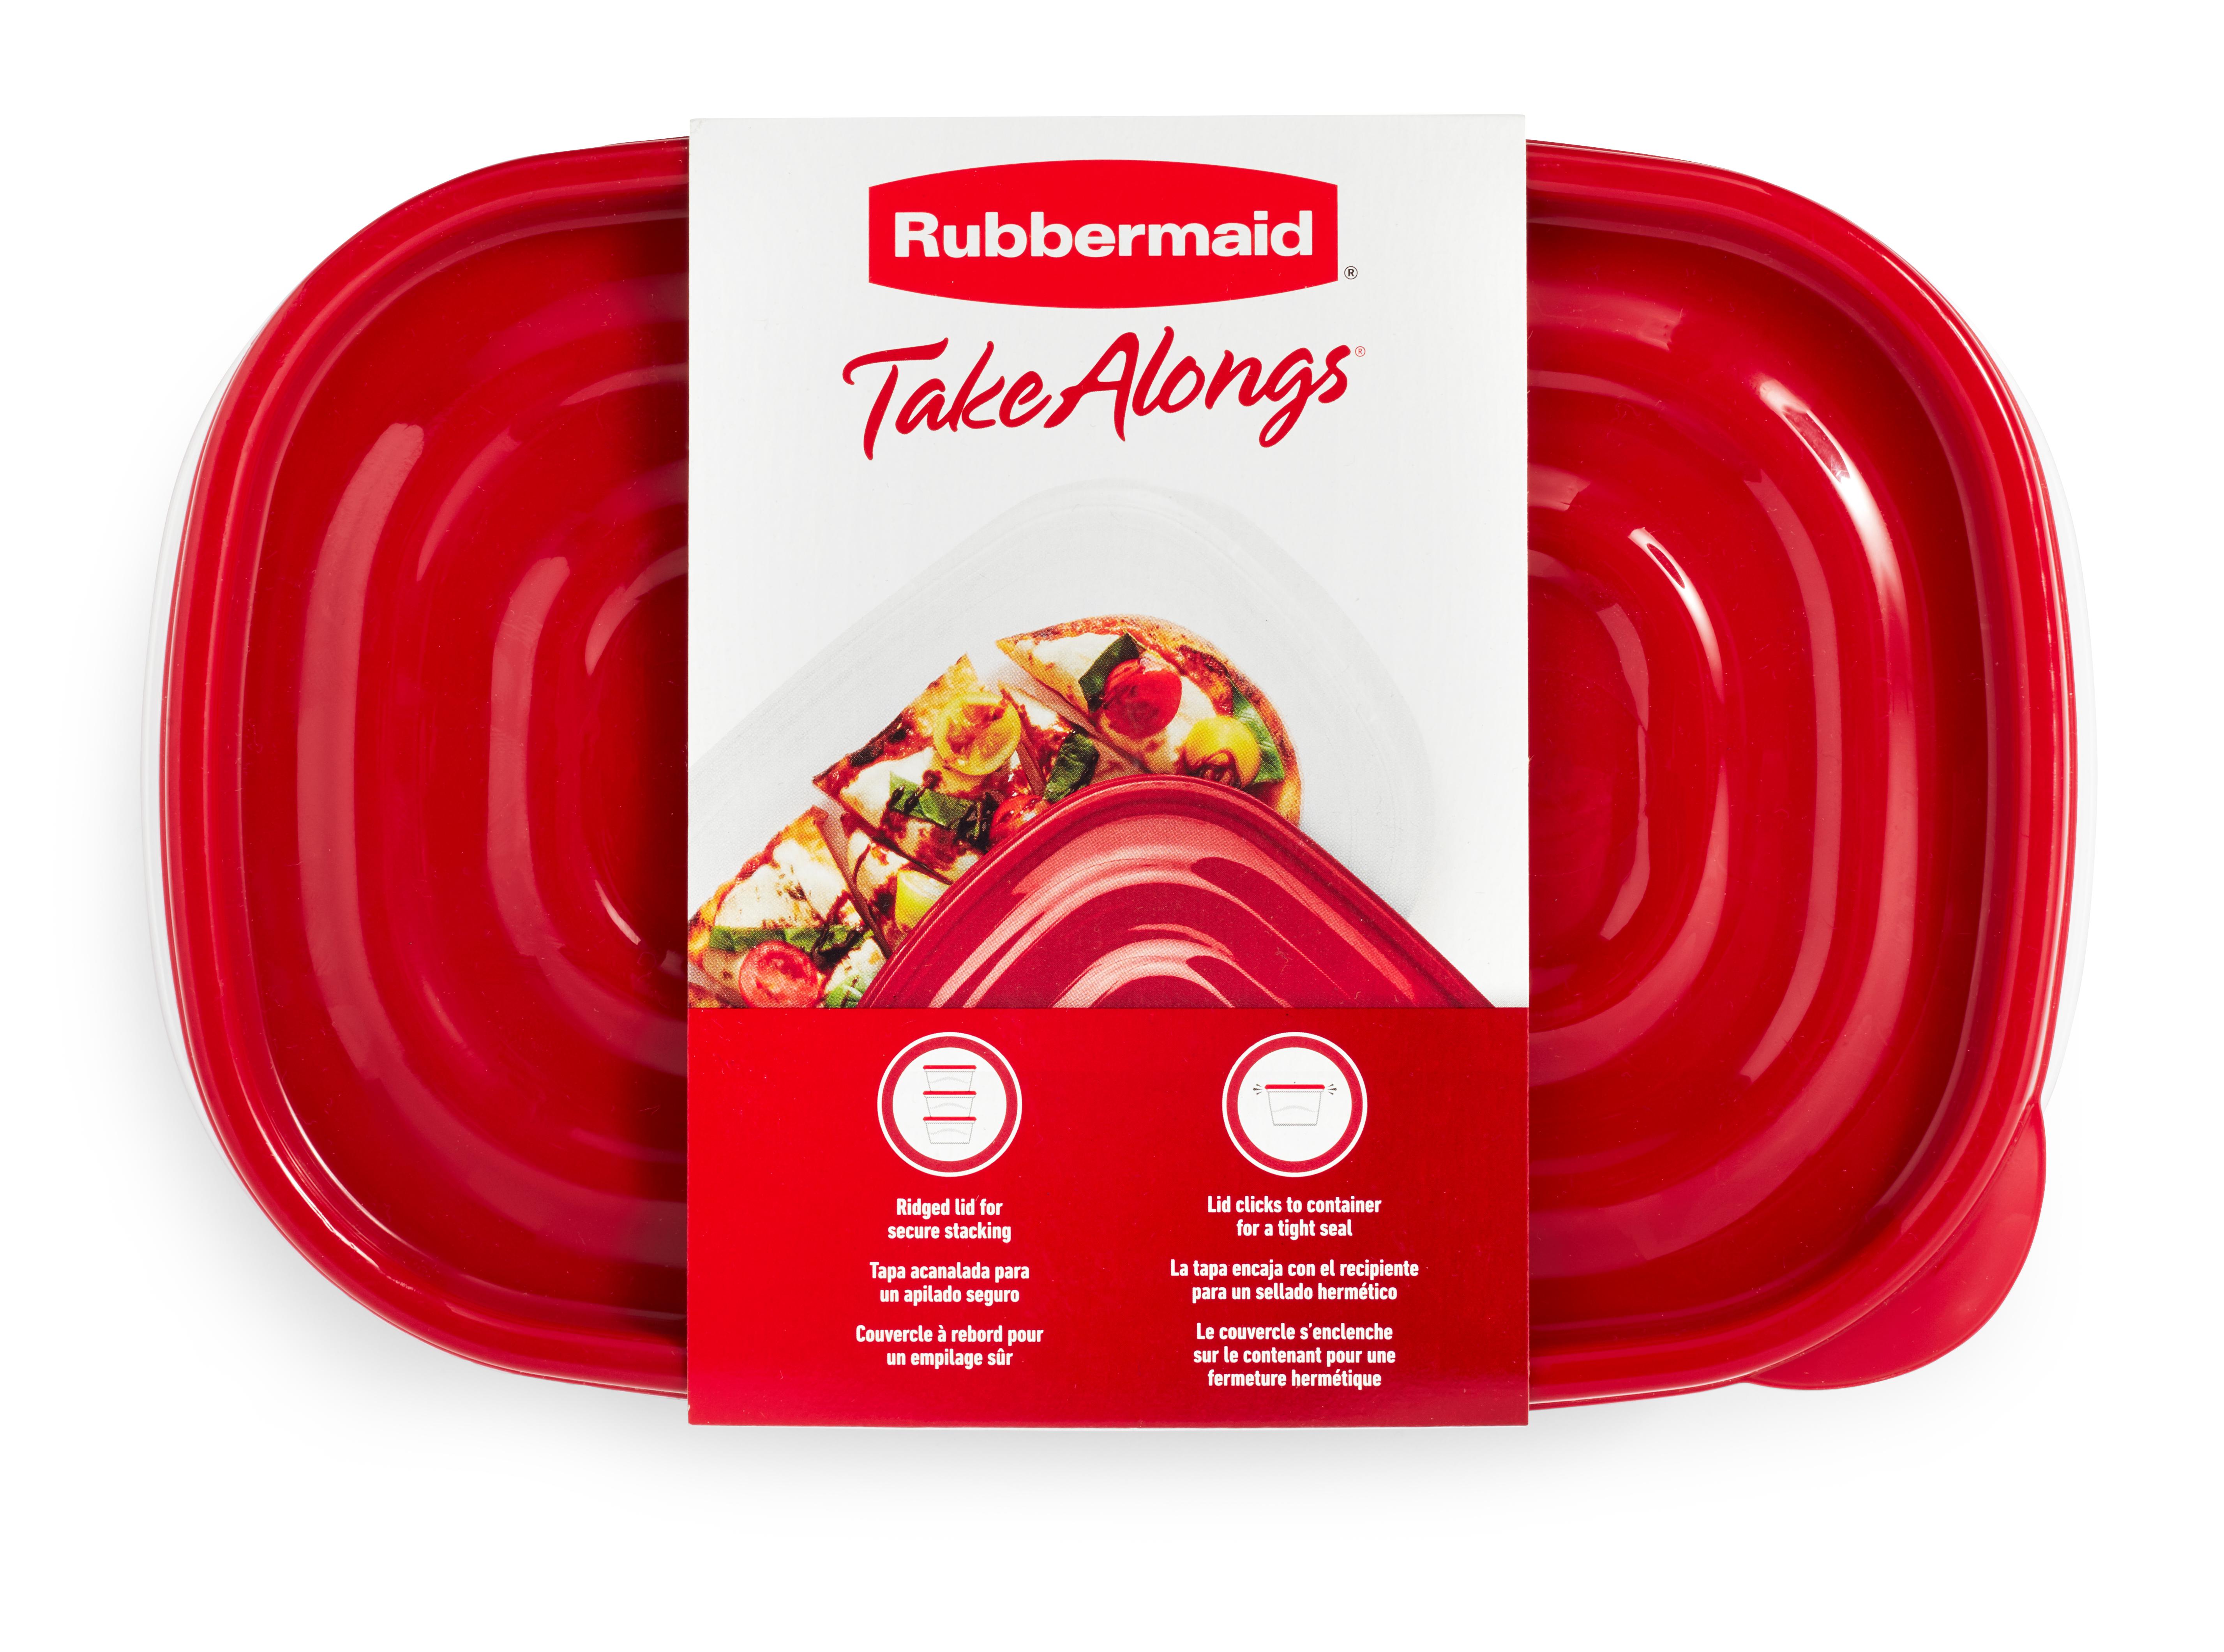 Rubbermaid TakeAlongs 4 Cup Rectangle Food Storage Containers, Set of 3, Red - image 4 of 7